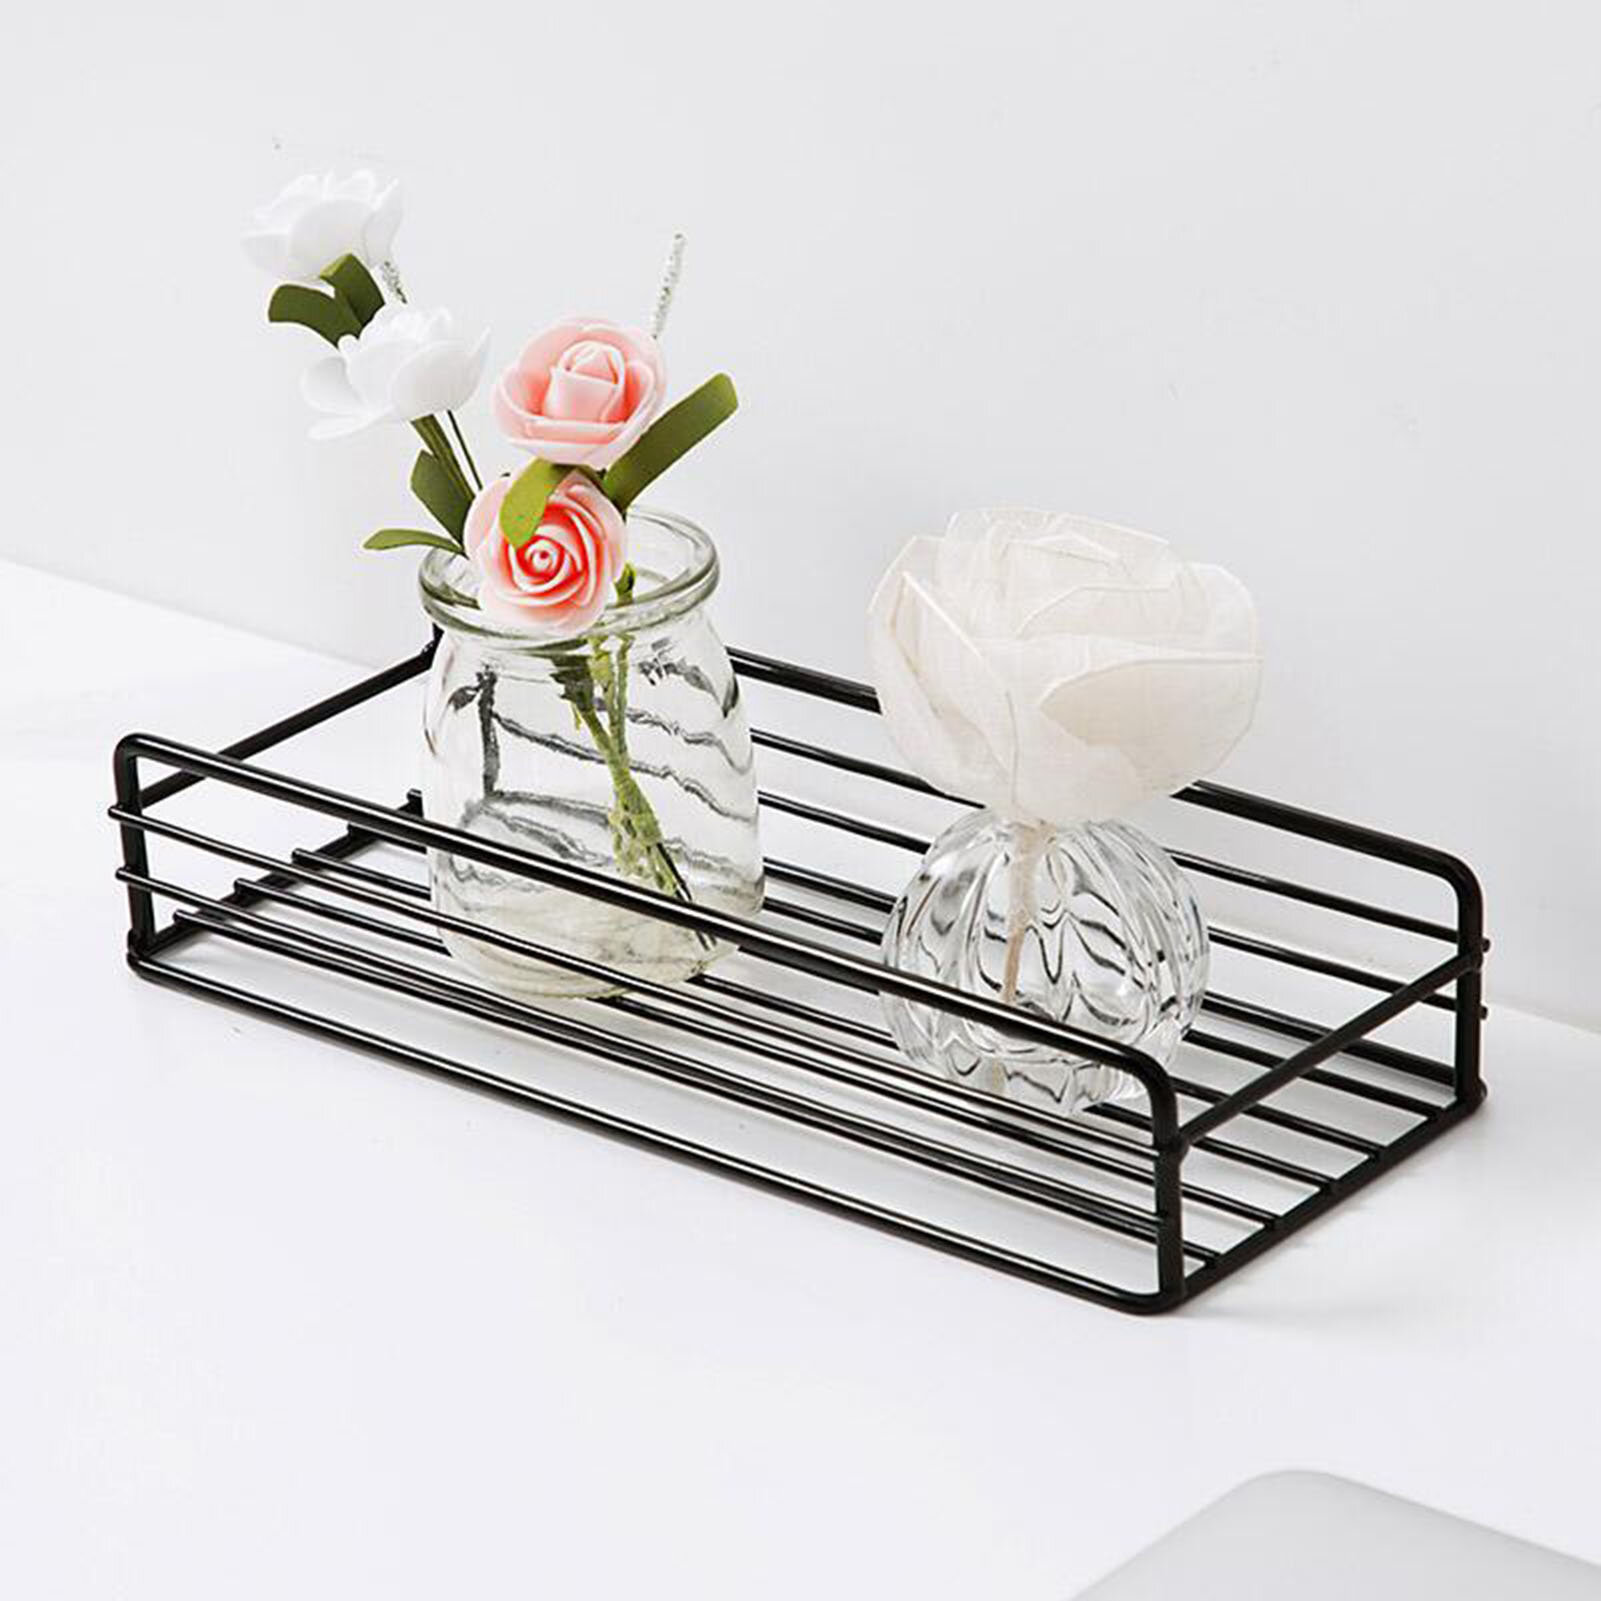 Details about   Accessory Napkin Holder Paper Hooks Mounted Hooks Holder Tool Roll Holders YS 